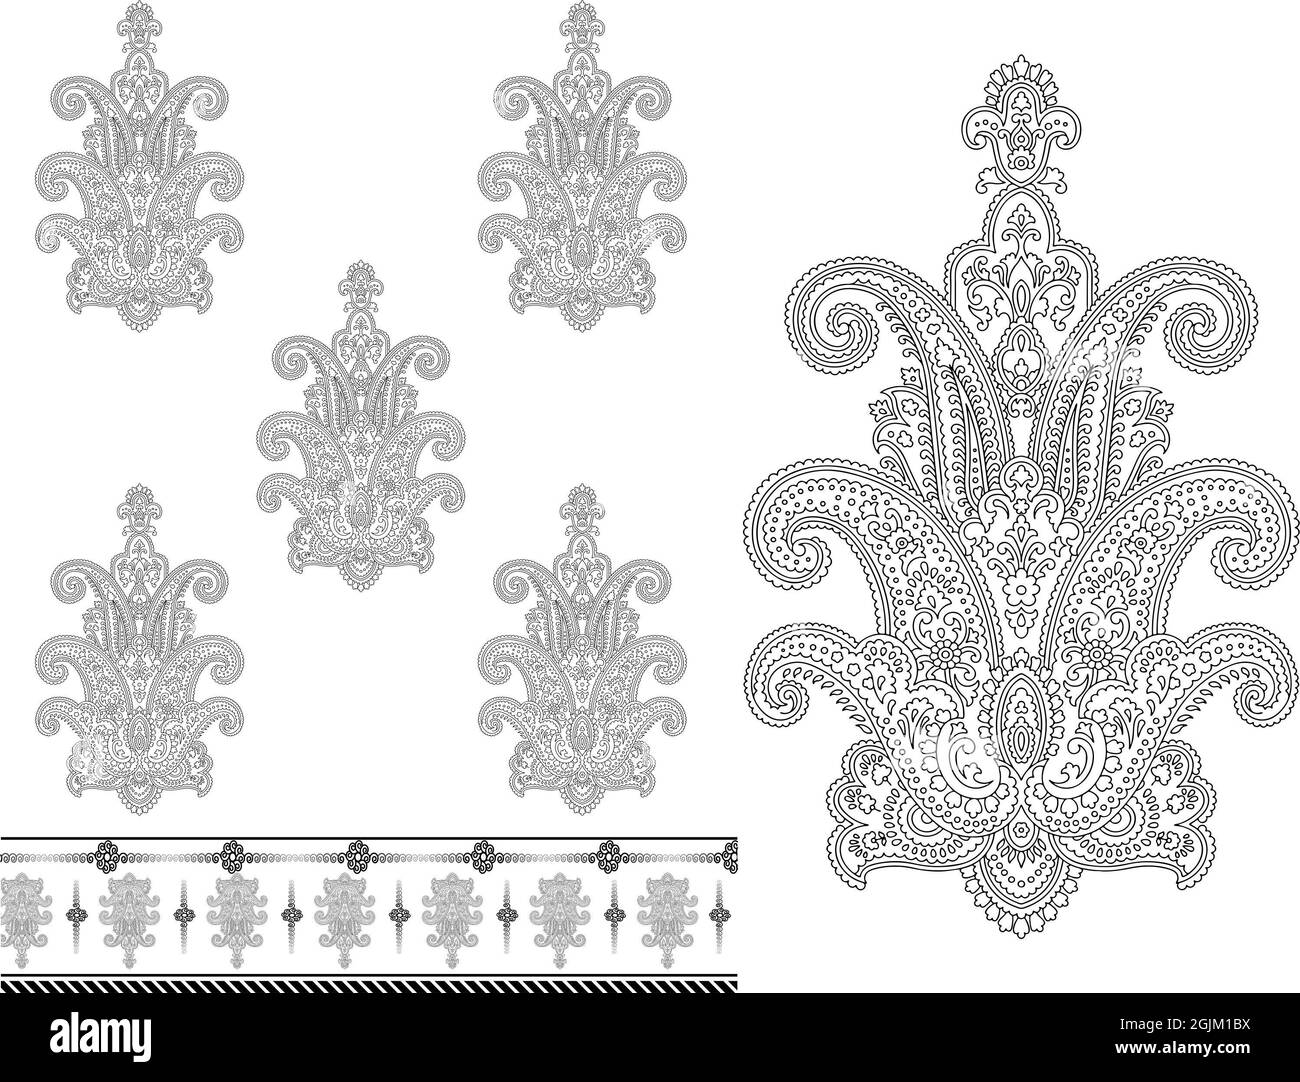 decorative paisley design, floral indian pattern Royalty Free Cliparts, Stock Illustration with seamless border Stock Photo